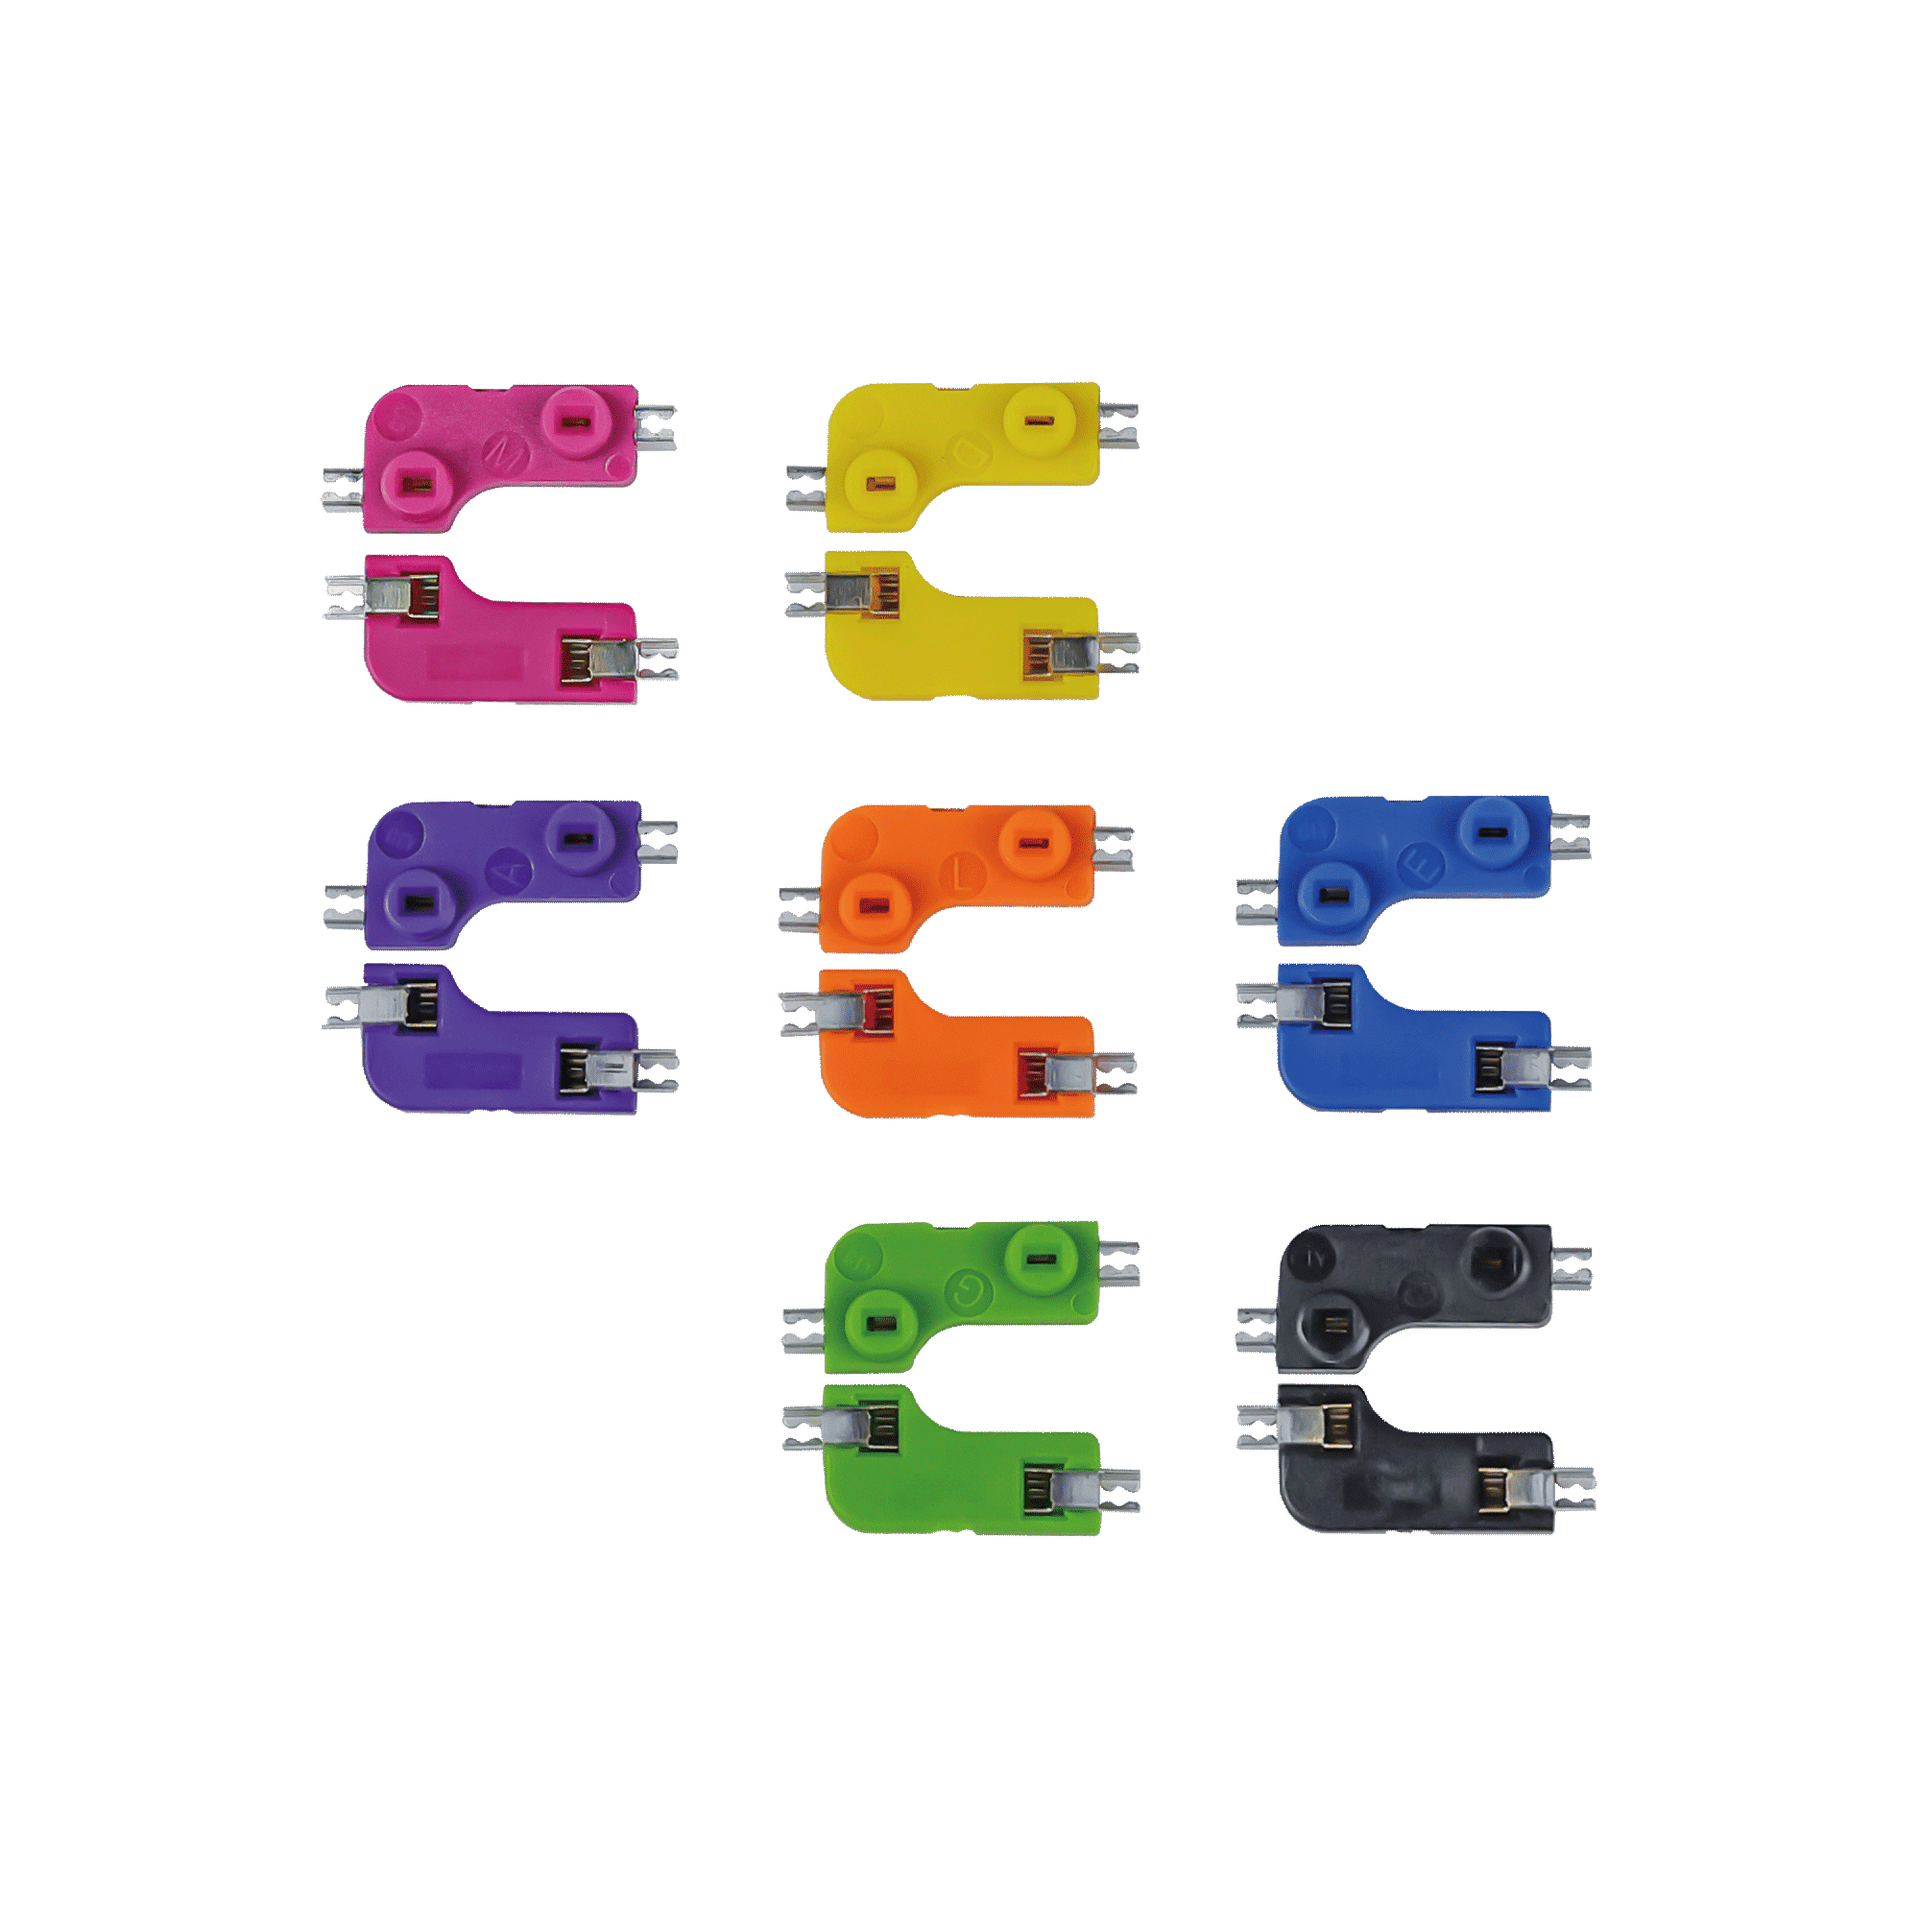 JWK Colorful Hotswap Sockets for MX Switches-Chosfox